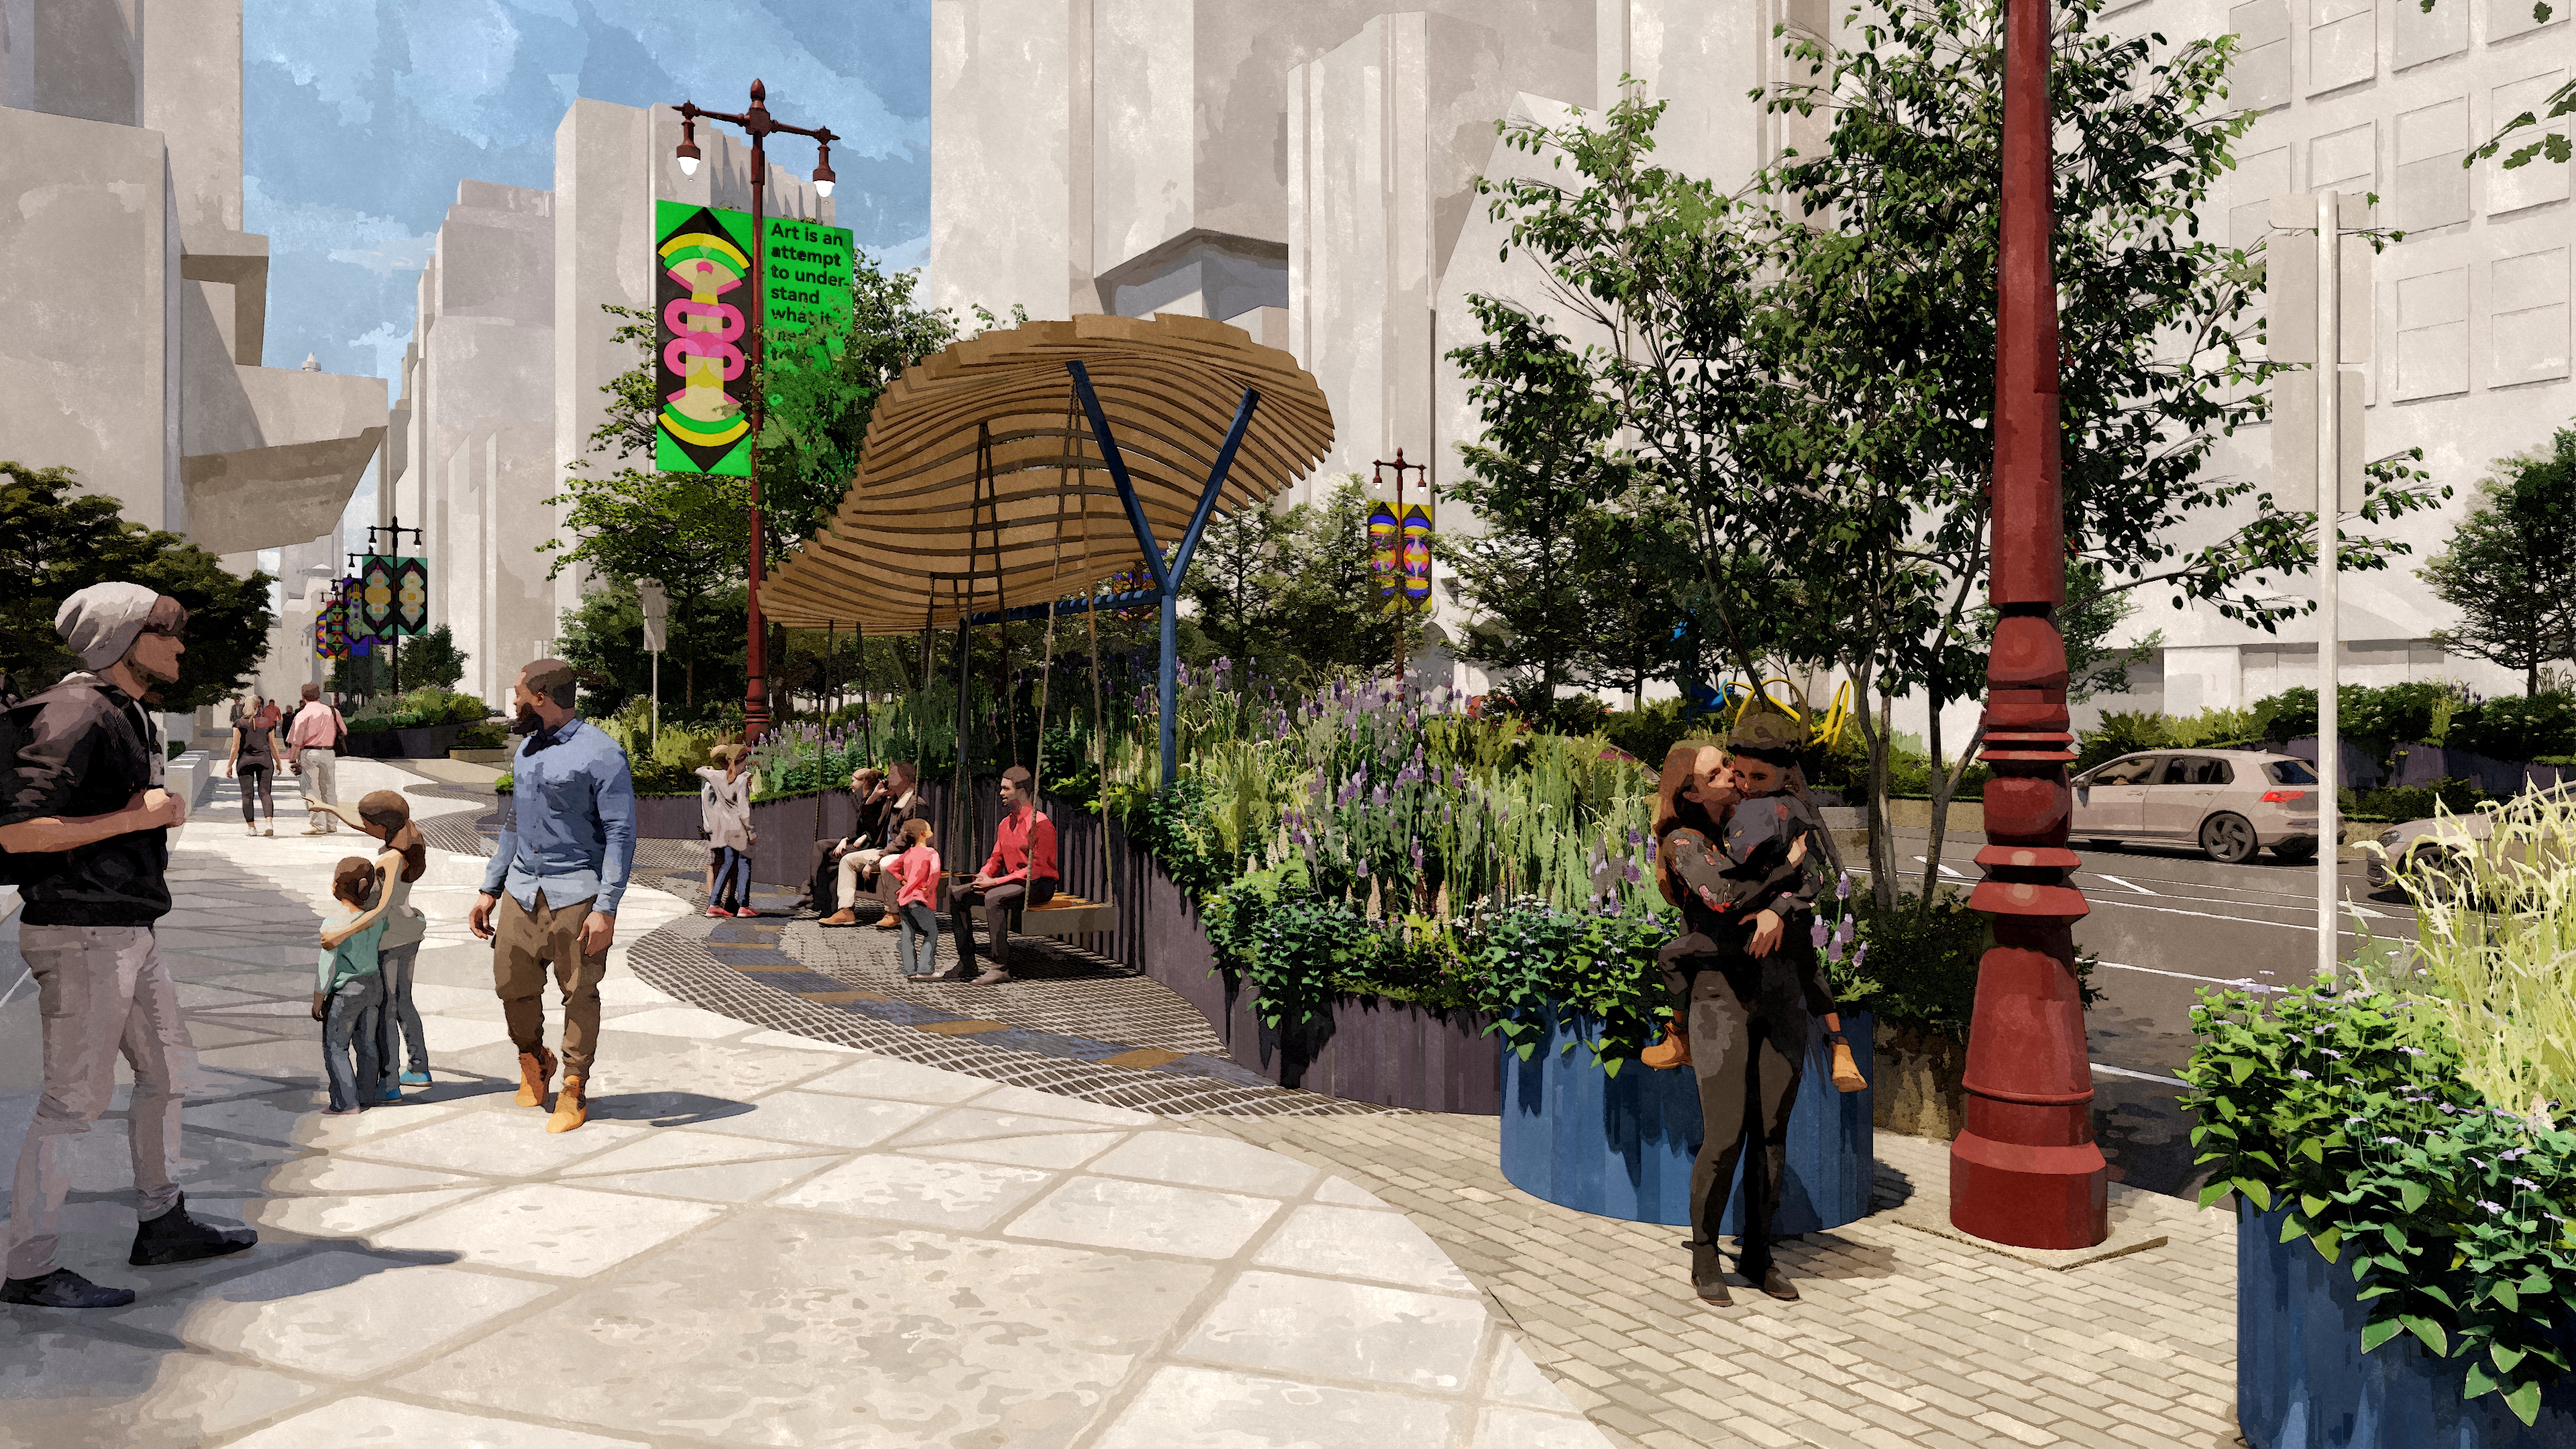 Artist's rendering shows vision to transform part of Philadelphia's Avenue of the Arts.